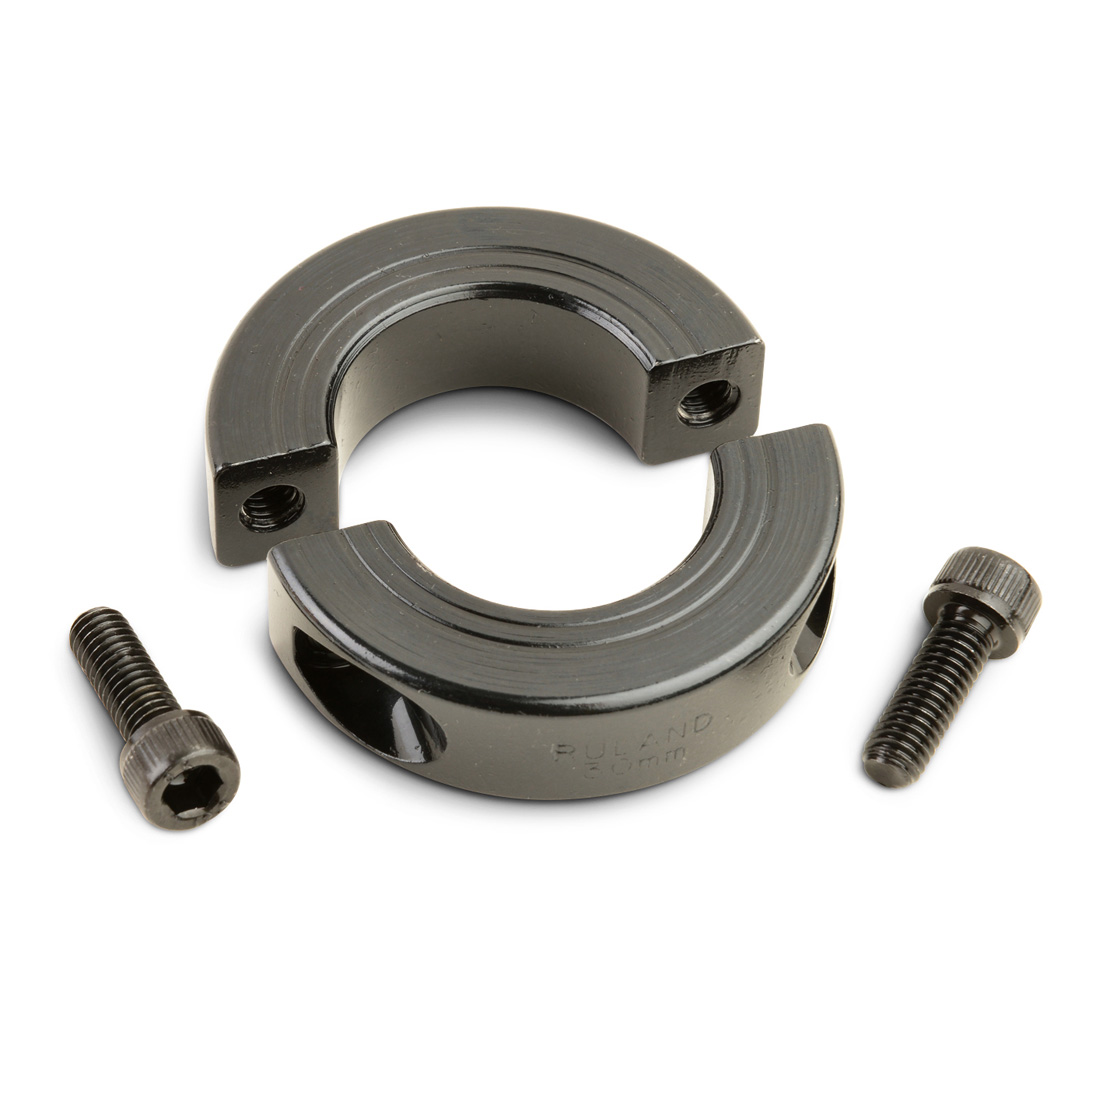 11//16 Width 1.875 Bore Aluminum Ruland SP-30-A Two-Piece Clamping Shaft Collar 2 7//8 OD